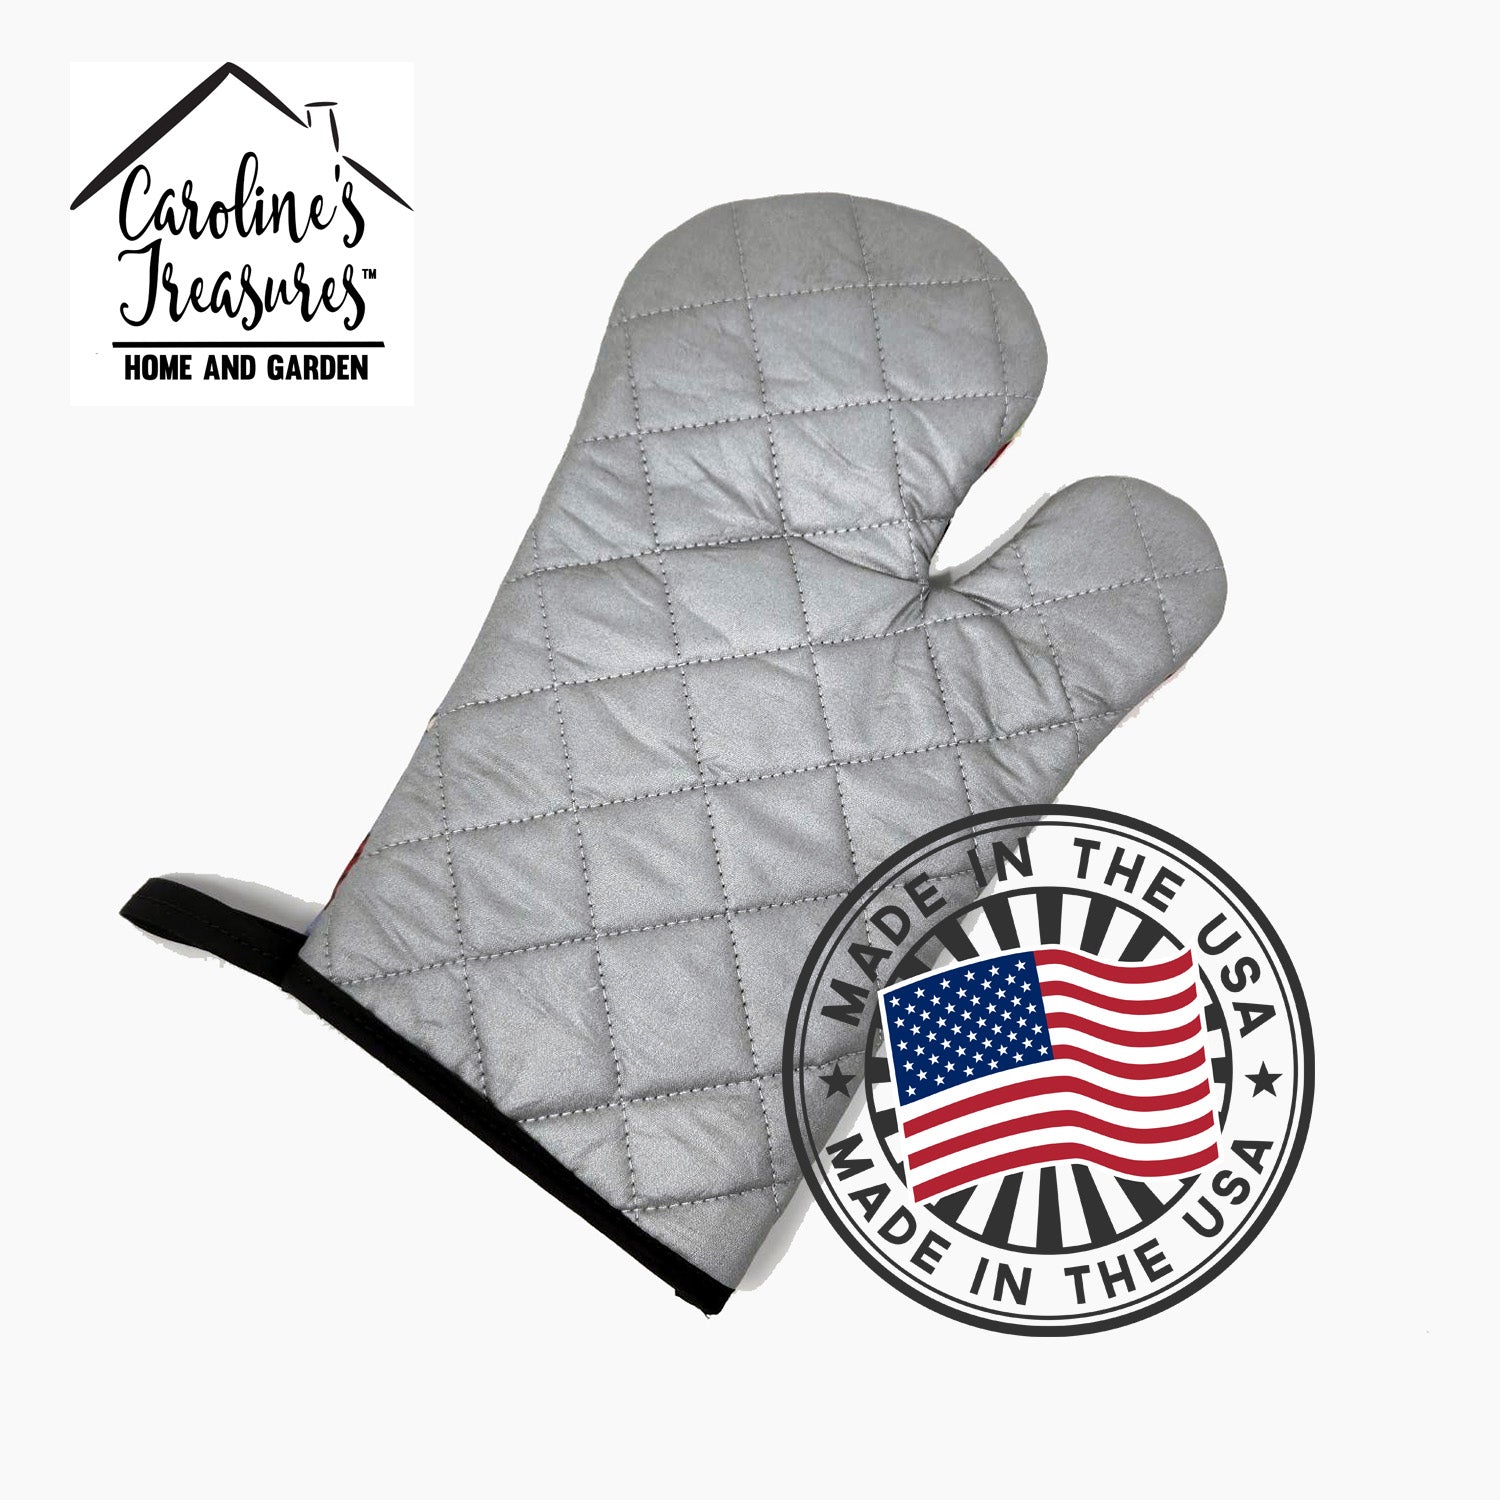 Dog House Collection Jack Russell Terrier Oven Mitt BB3981OVMT  the-store.com.